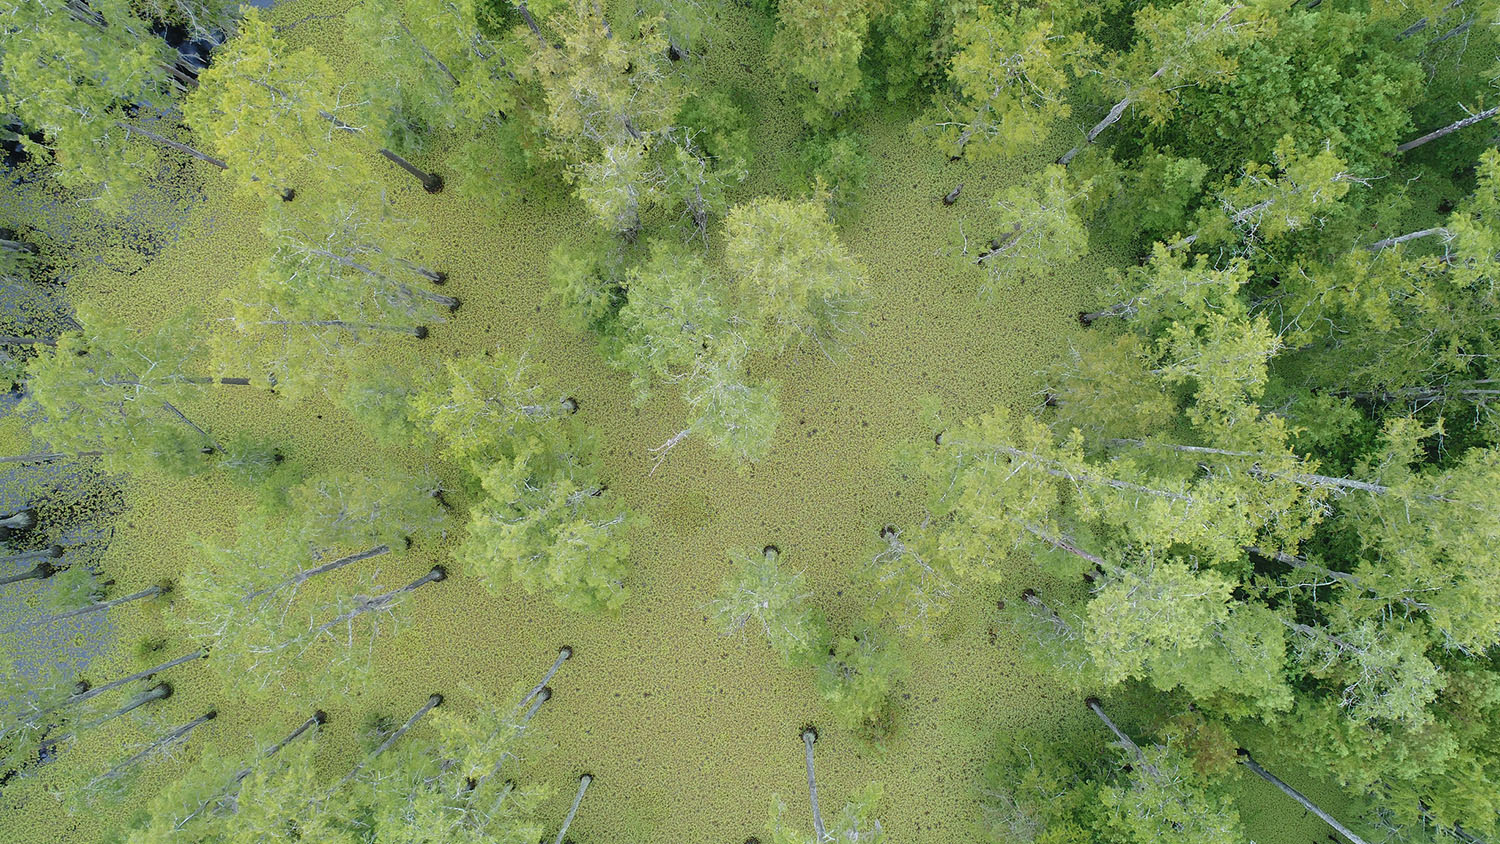 Aerial view of a wetland forest shows green trees and patches of floating weed - NC State Researchers: Show Us What You're Working On - College of Natural Resources News NC State University